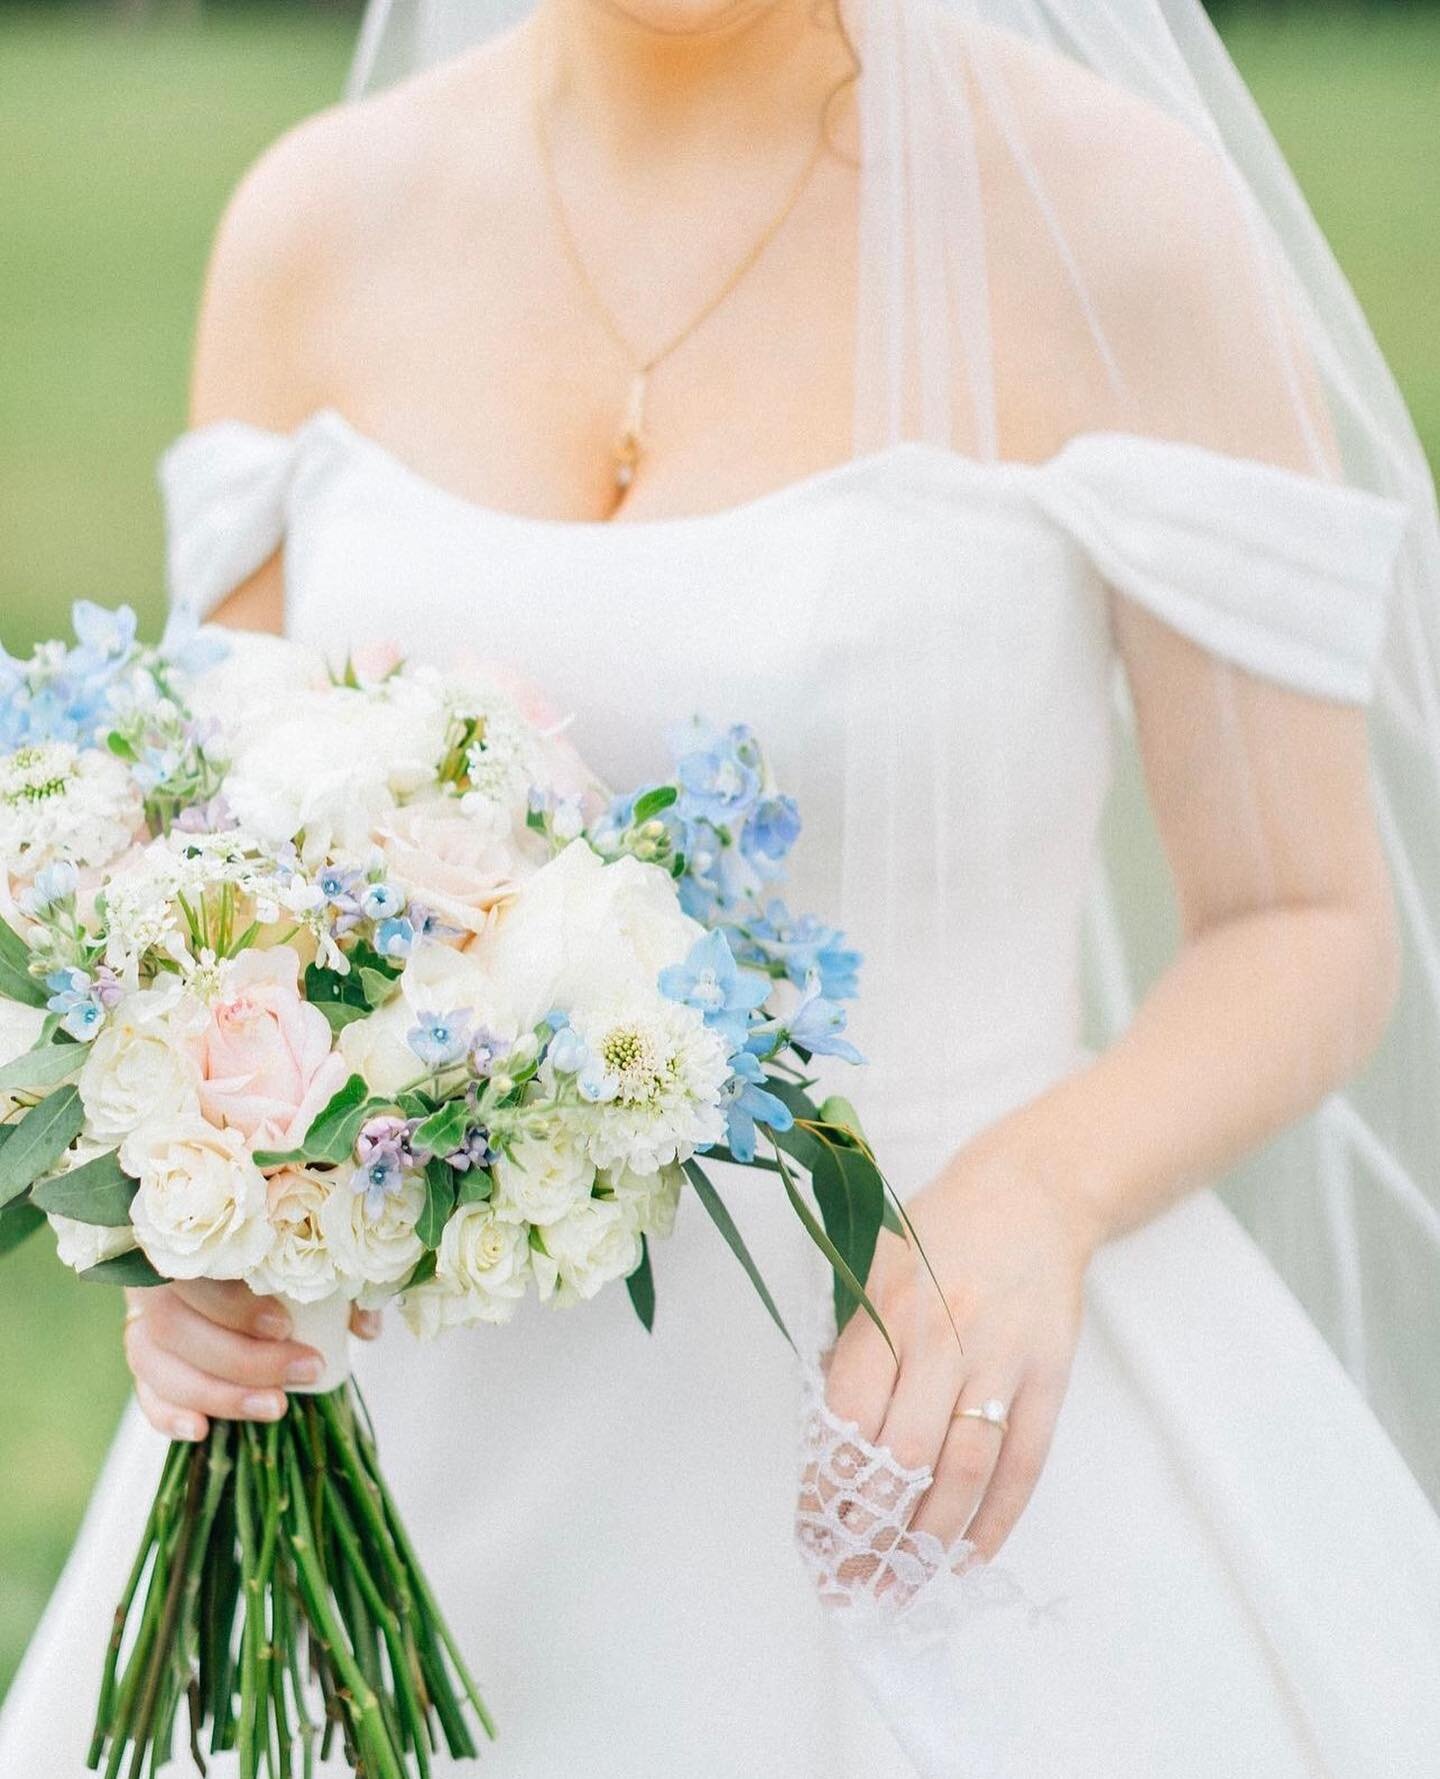 Stunning details of a Blue House Bride from @marshalynphotography 🩵